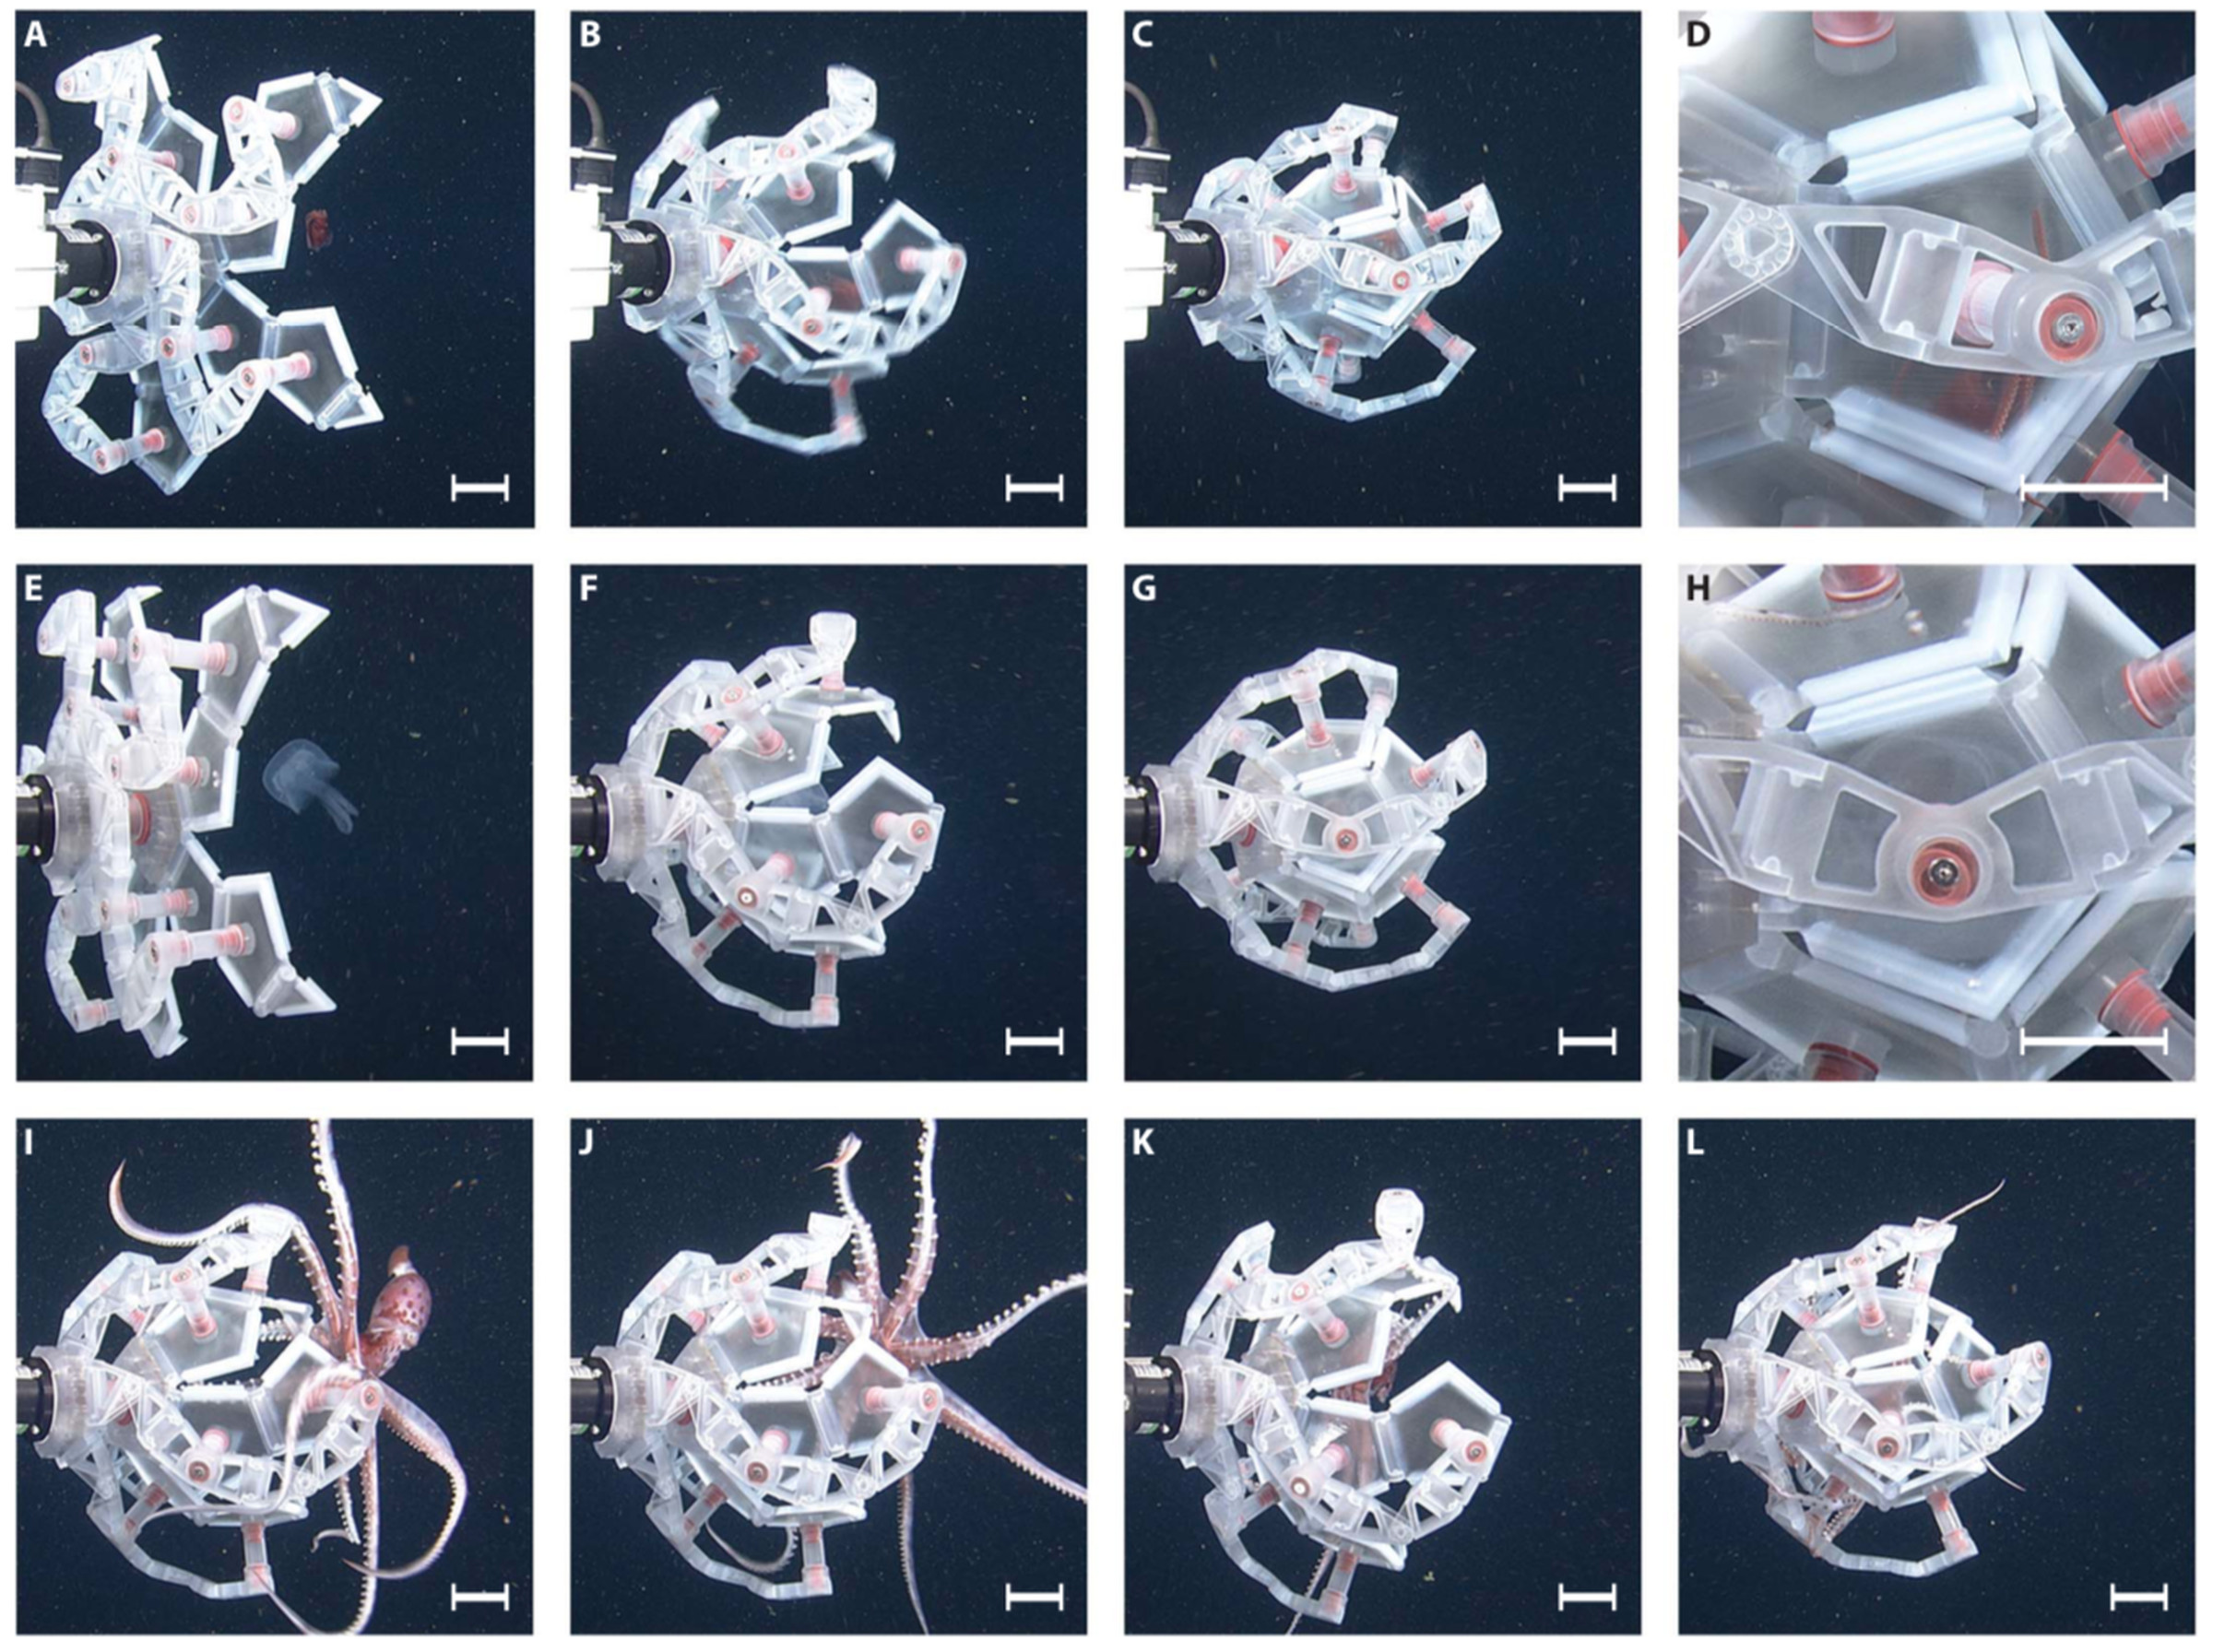 Still images showing the capture of three different types of soft-bodied sea life using the RAD.